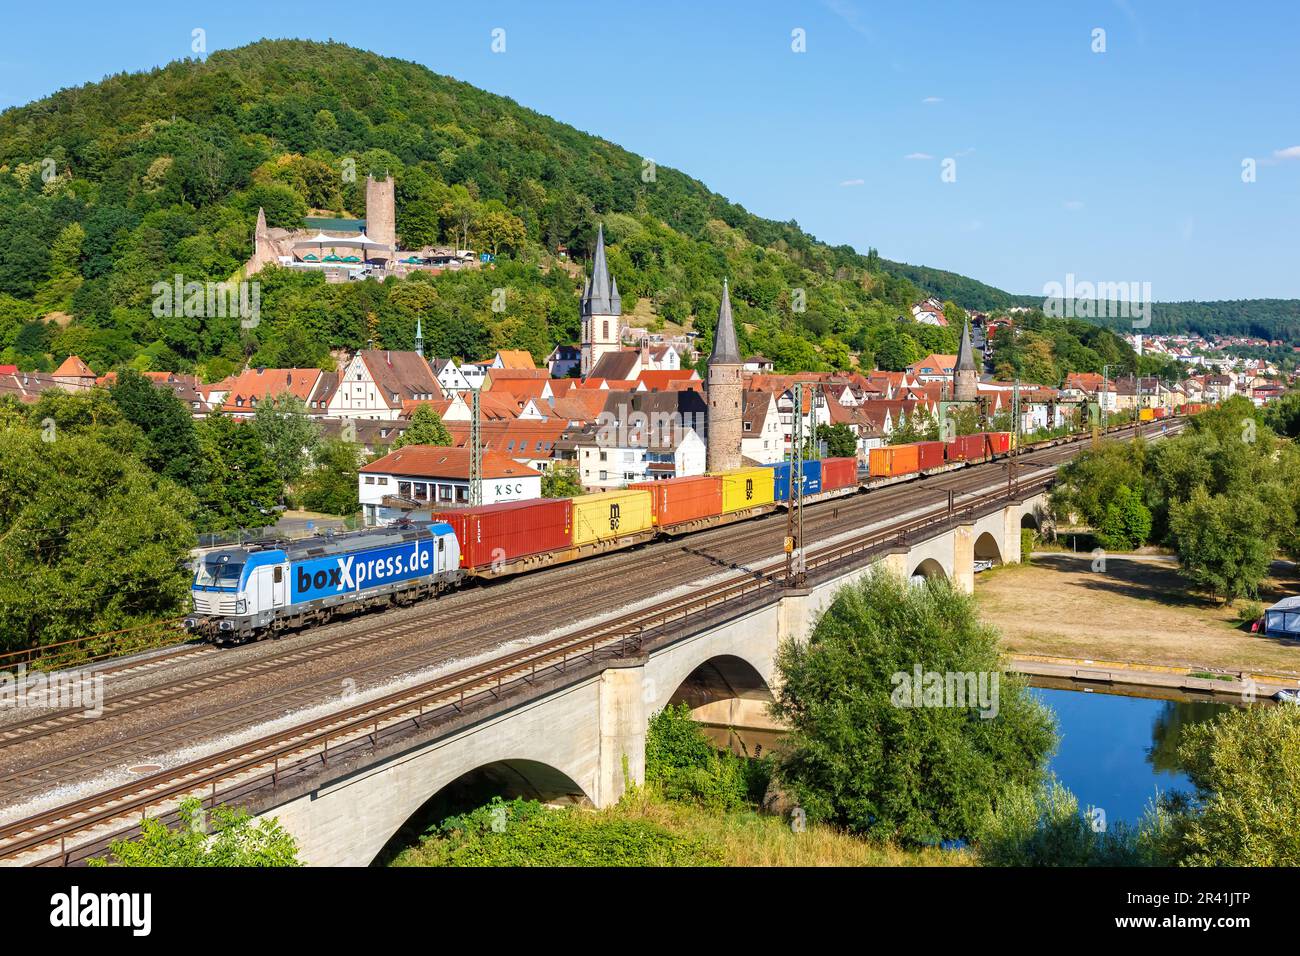 Freight train with container cargo train from boxXpress in GemÃ¼nden am Main, Germany Stock Photo